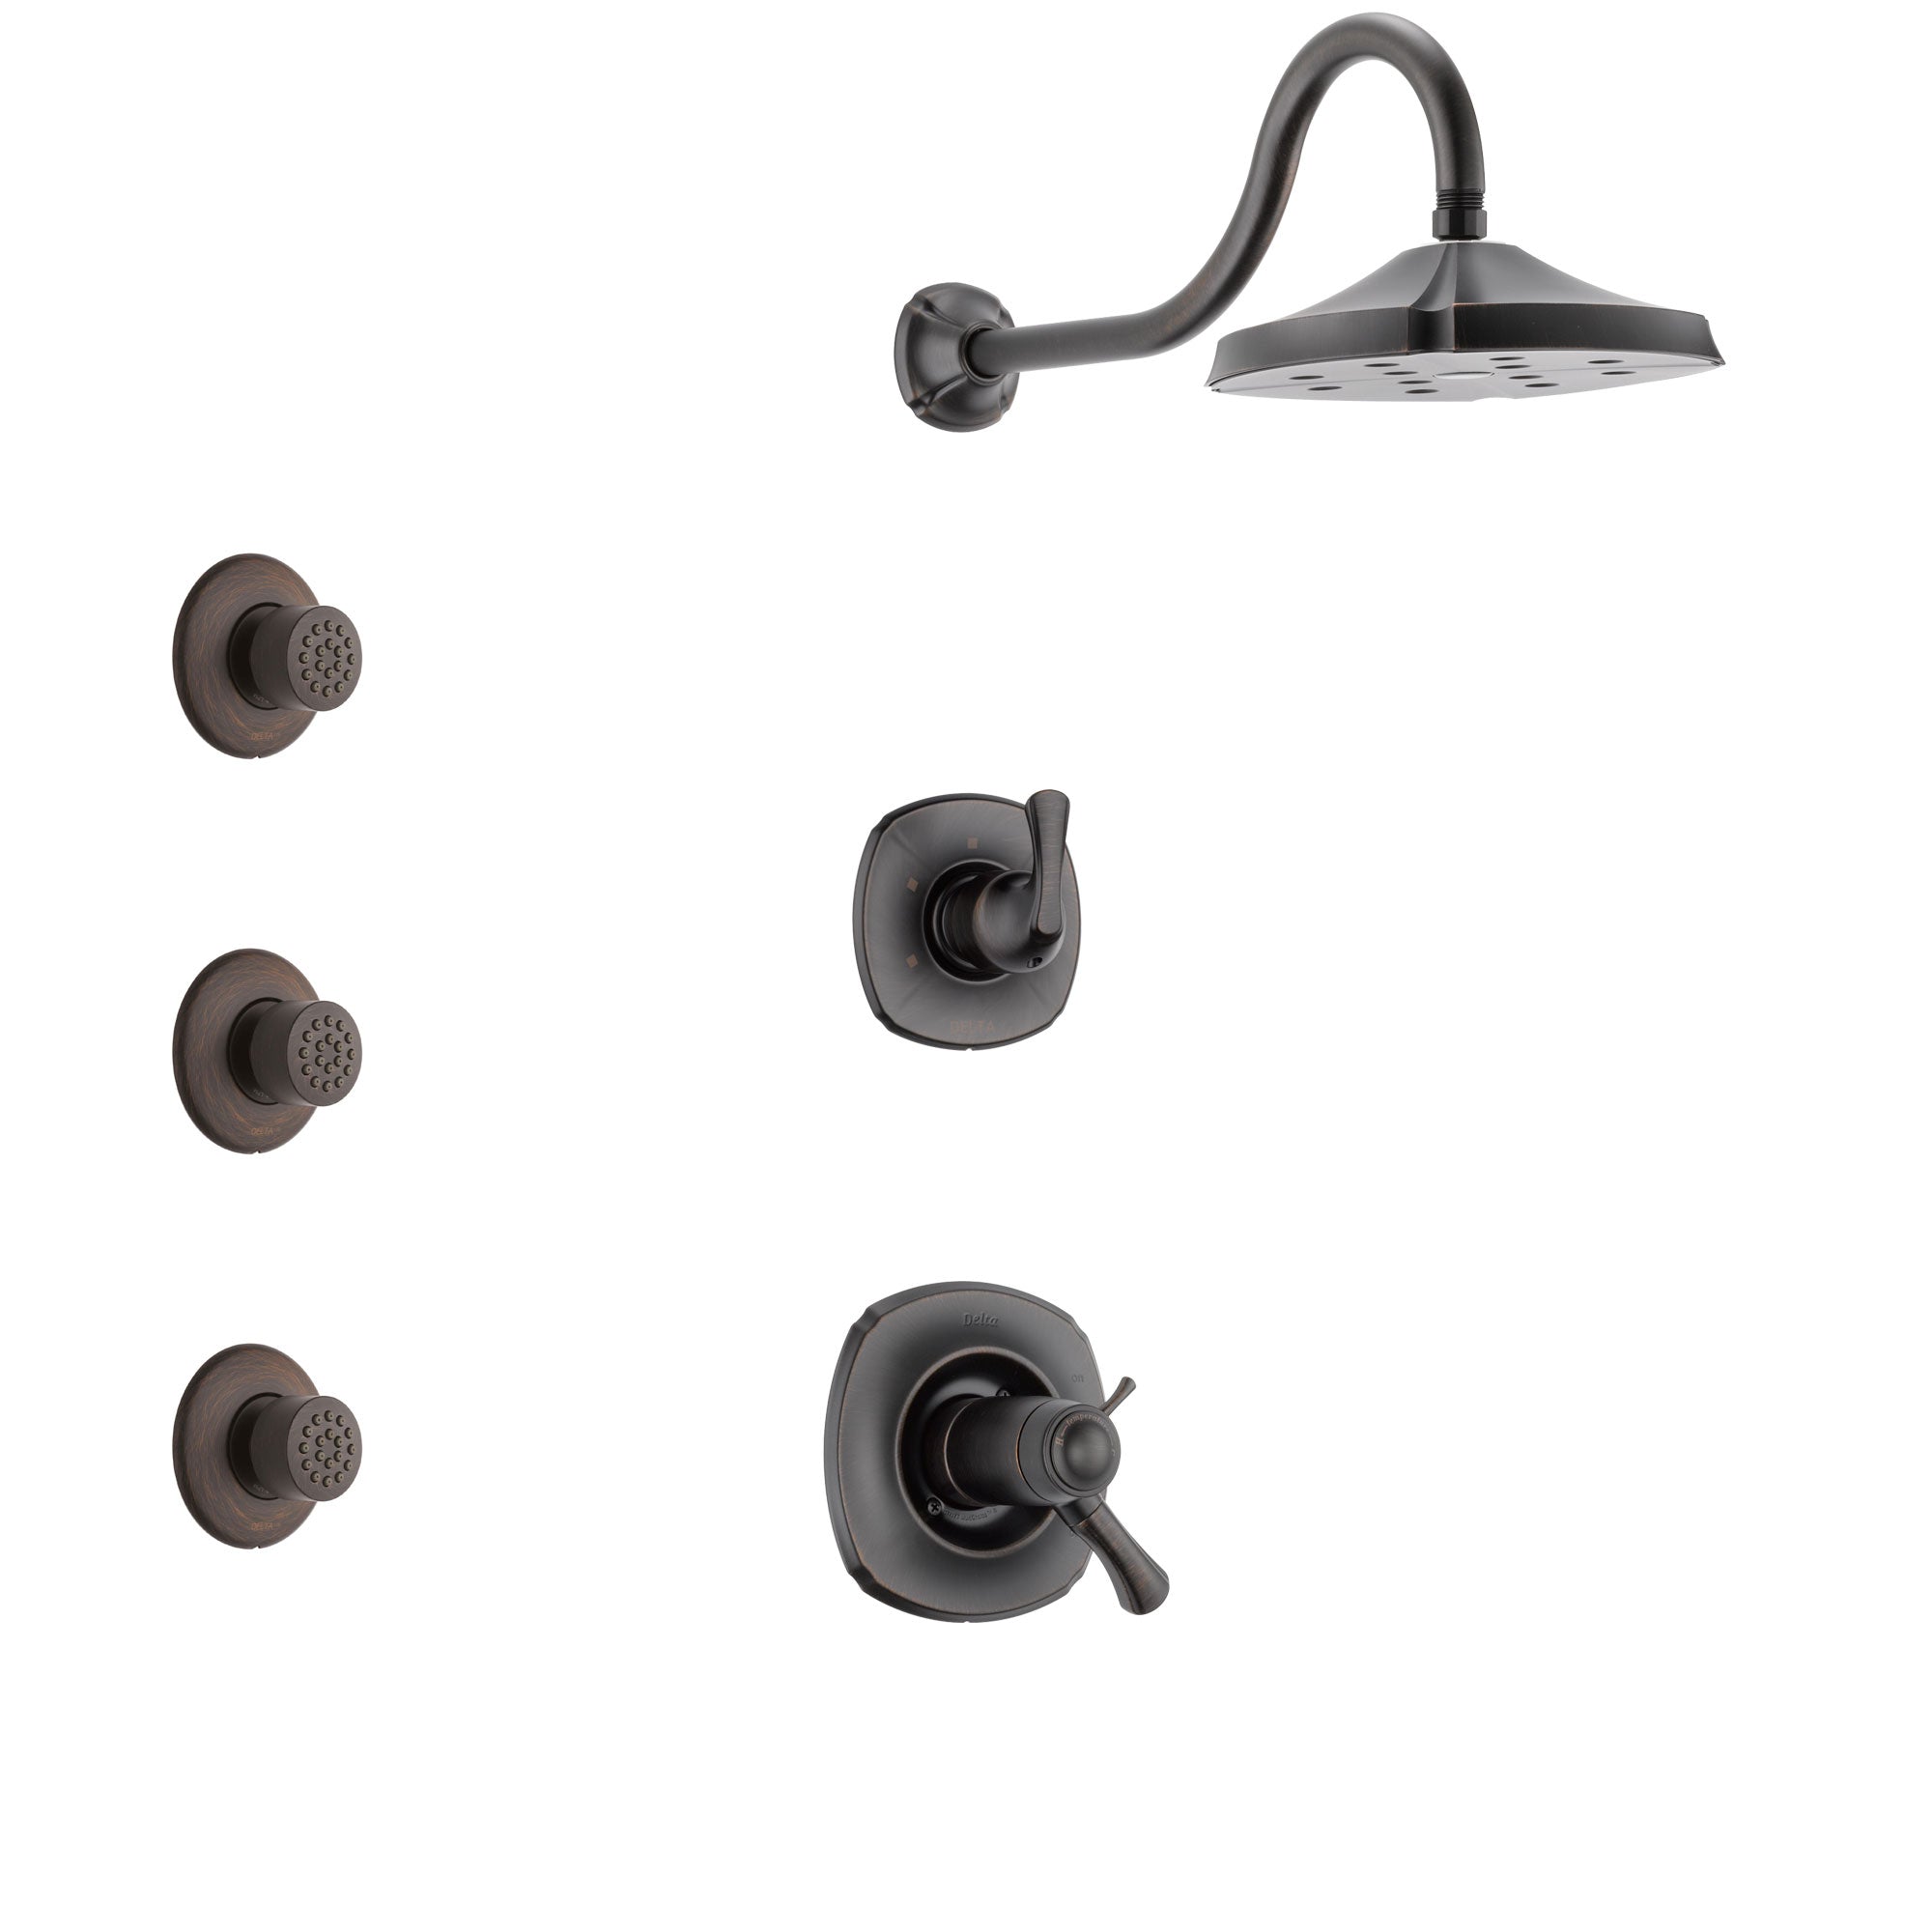 Delta Addison Venetian Bronze Shower System with Dual Thermostatic Control Handle, 3-Setting Diverter, Showerhead, and 3 Body Sprays SS17T2921RB1